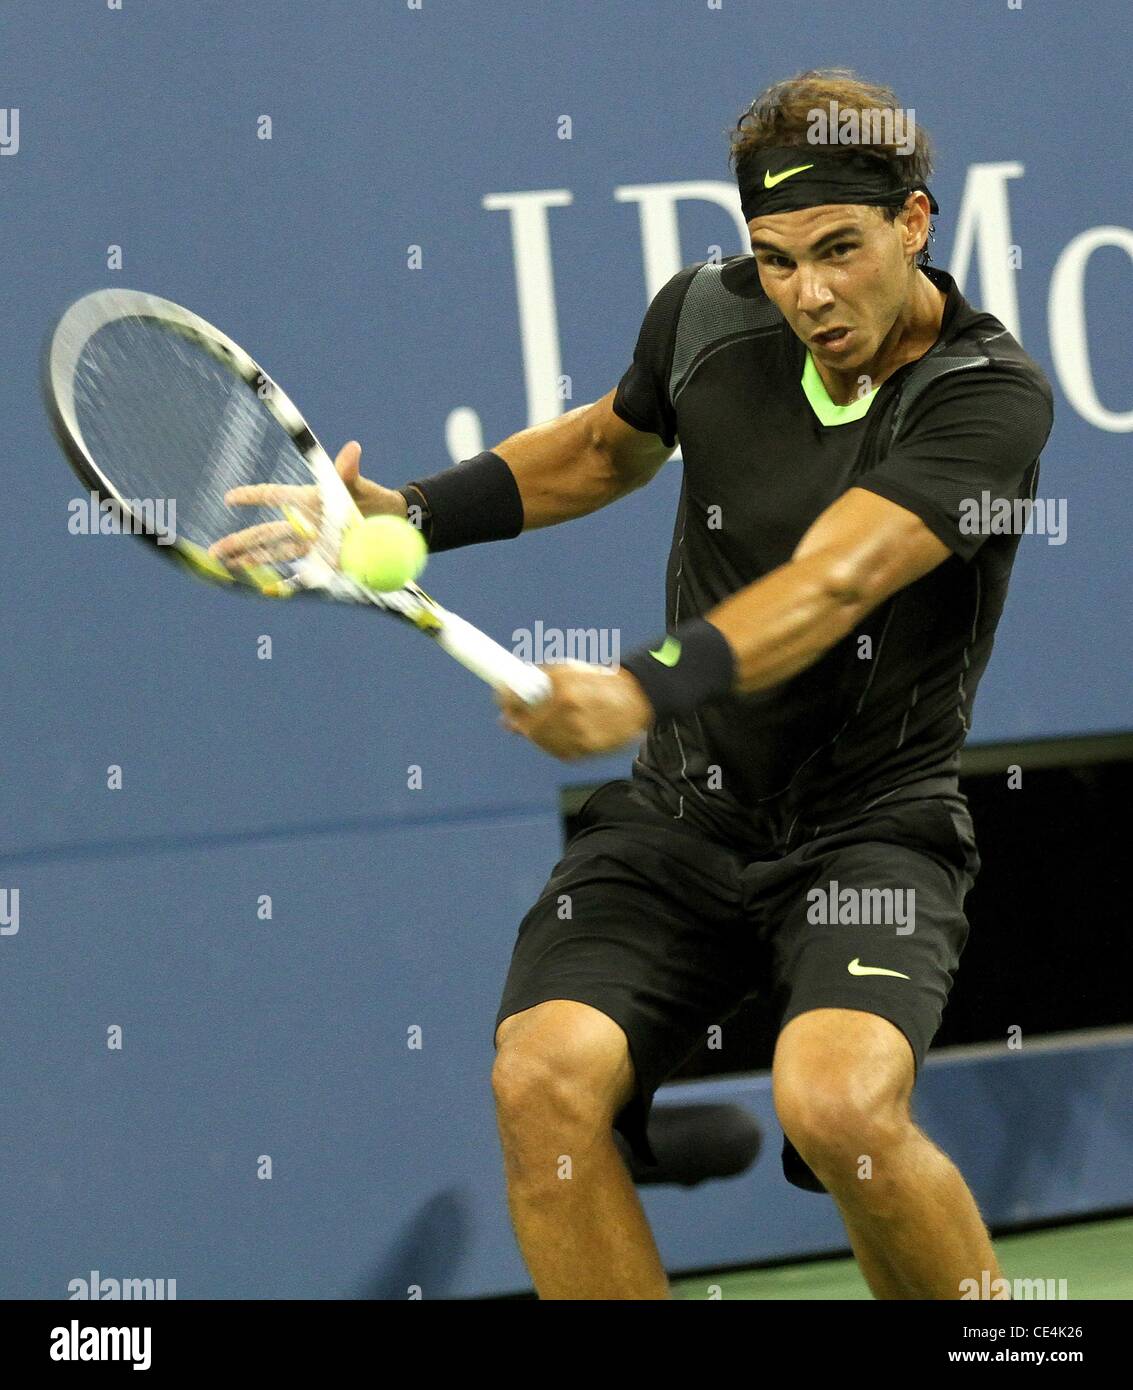 Rafael Nadal of Spain defeats Teymuraz Gabashvili of Russia during their first round men's singles match on day two of the 2010 U.S. Open at the USTA Arthur Ashe Stadium in Flushing Queens, New York City, USA - 31.08.10 Stock Photo